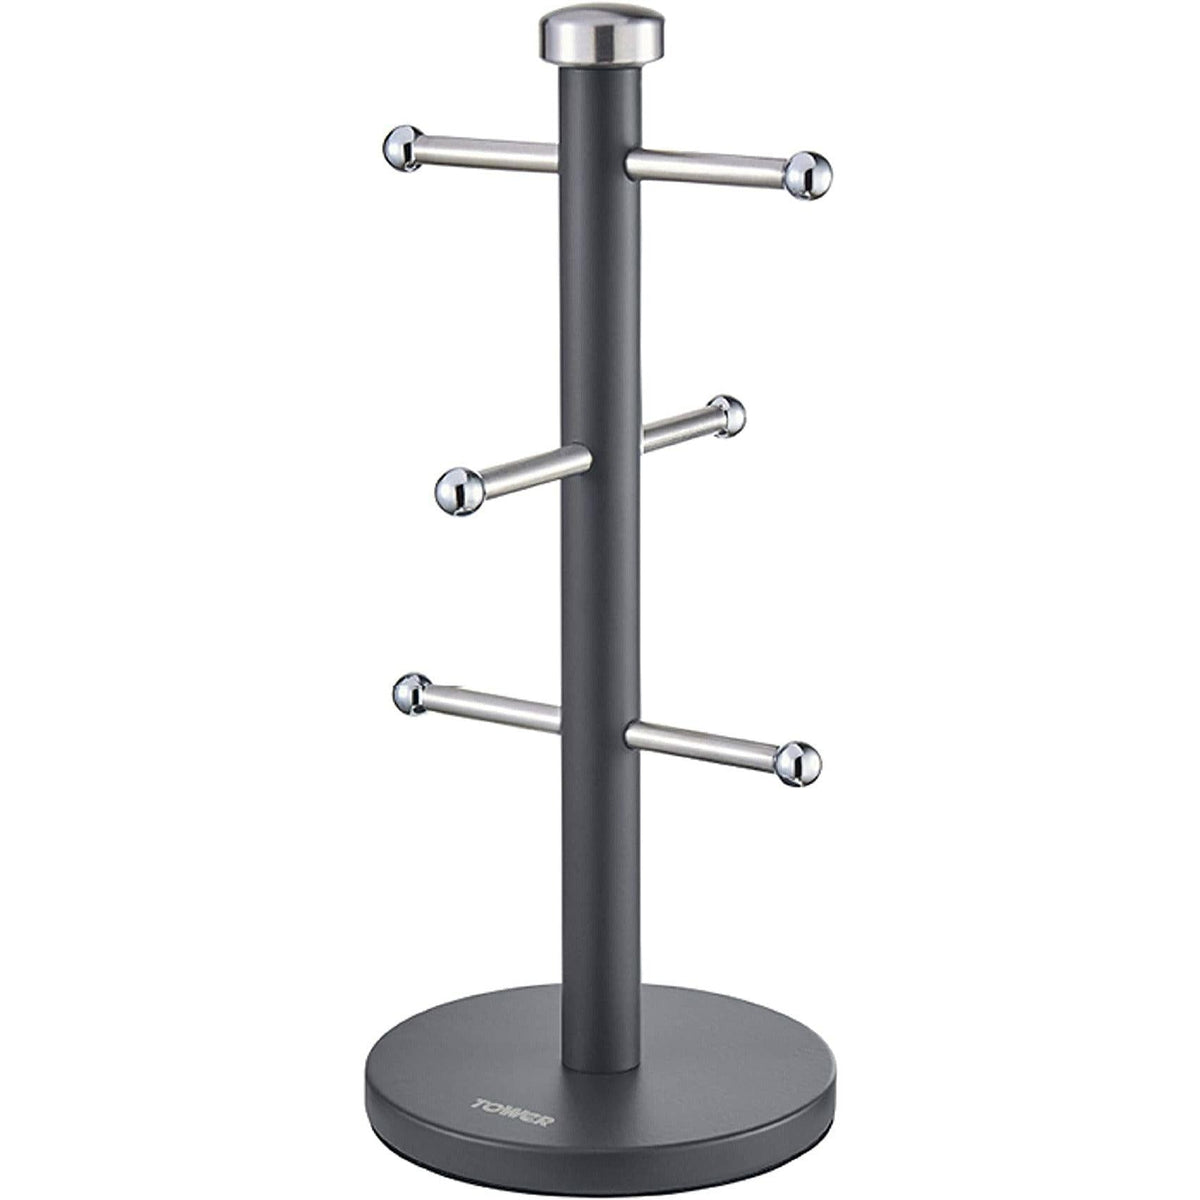 Tower 6 Cup Mug Tree with Stainless Steel Branches - Slate | T826102SLT (7523533390012)